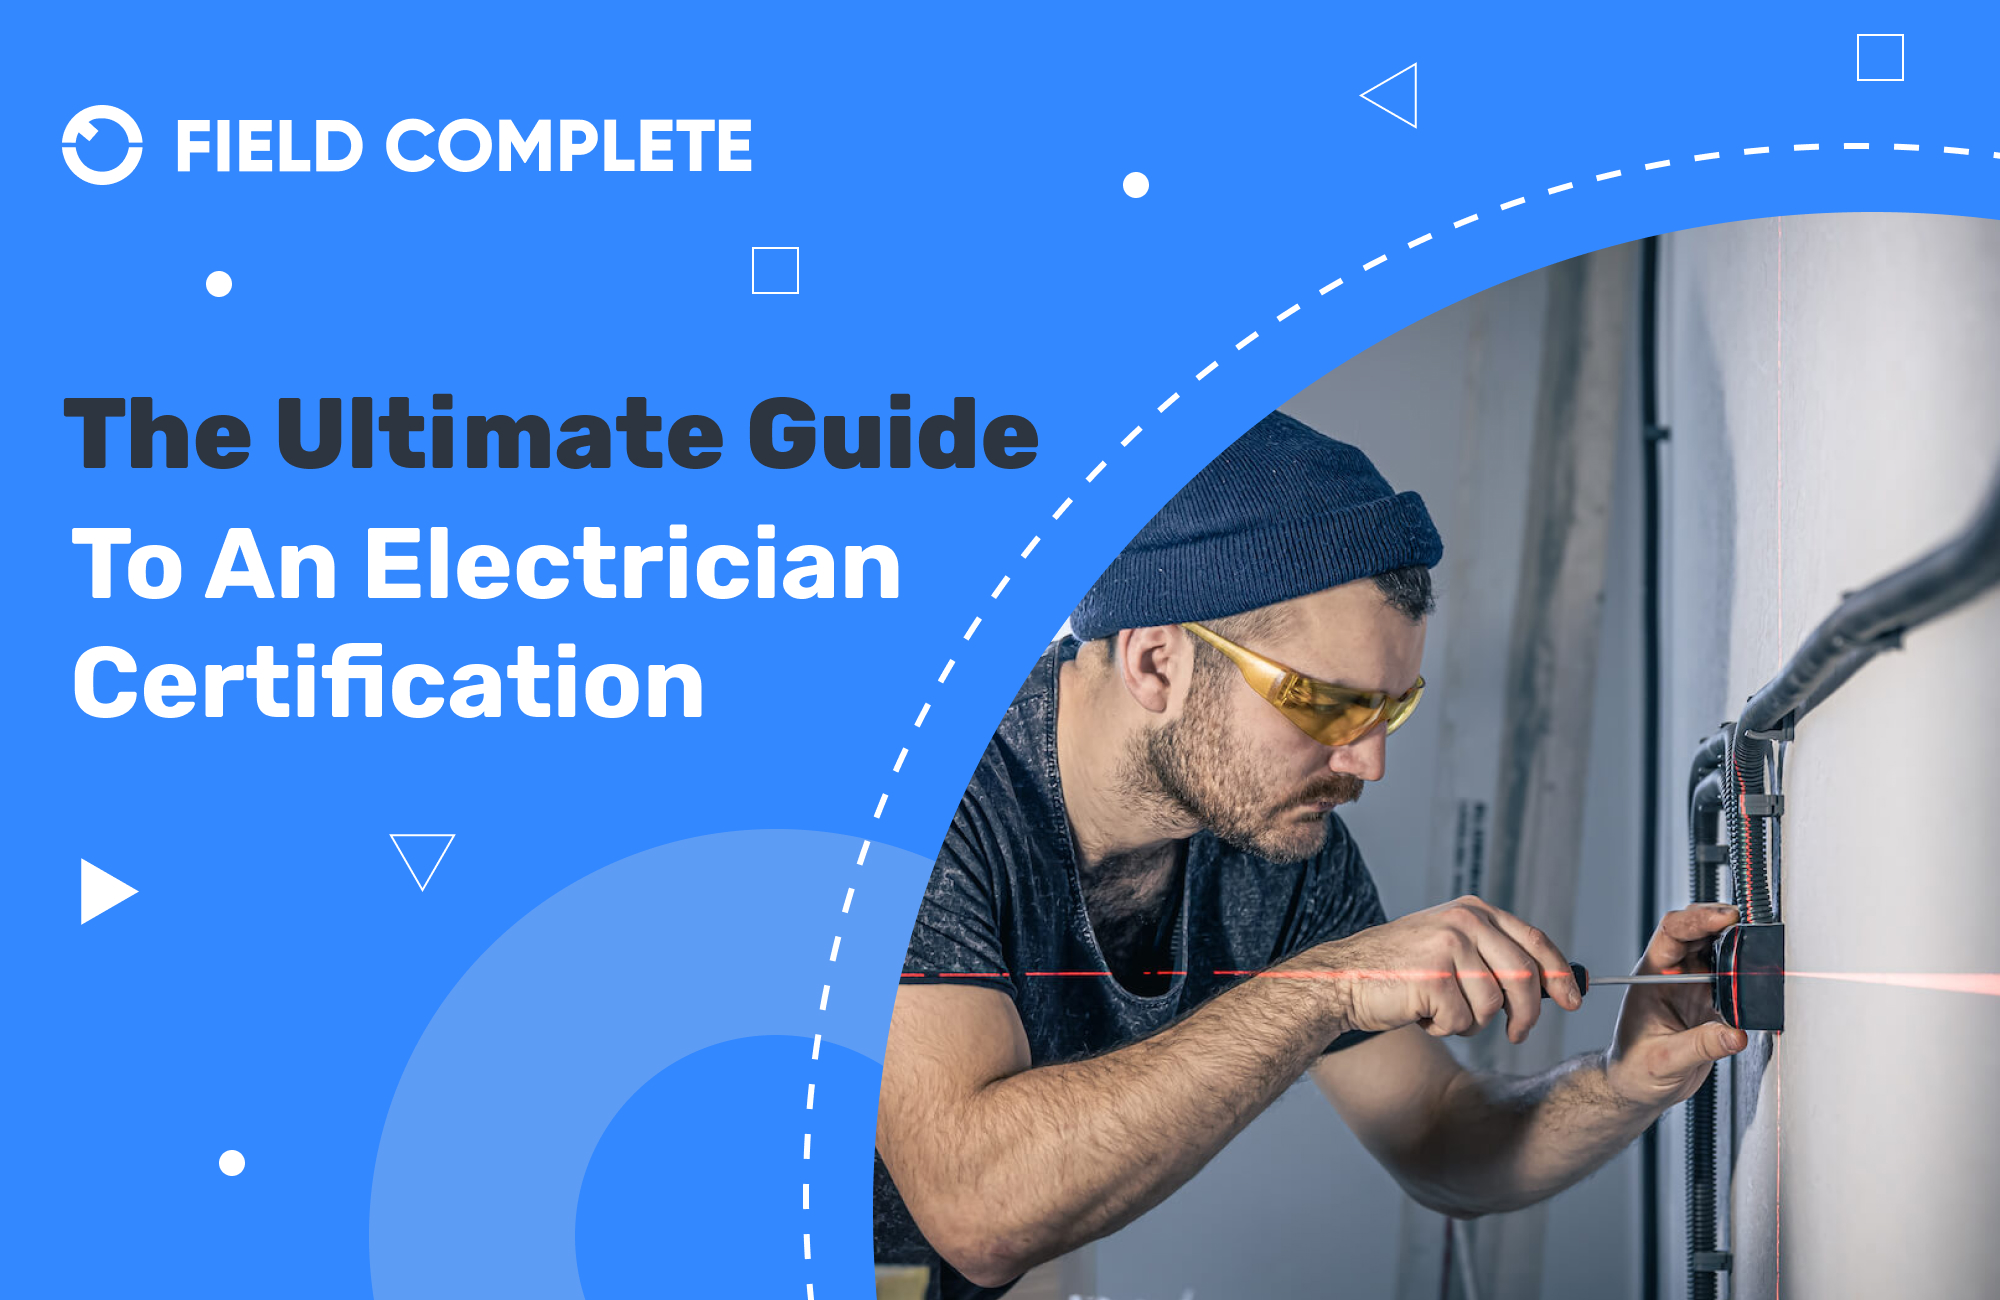 The Ultimate Guide To An Electrician Certification